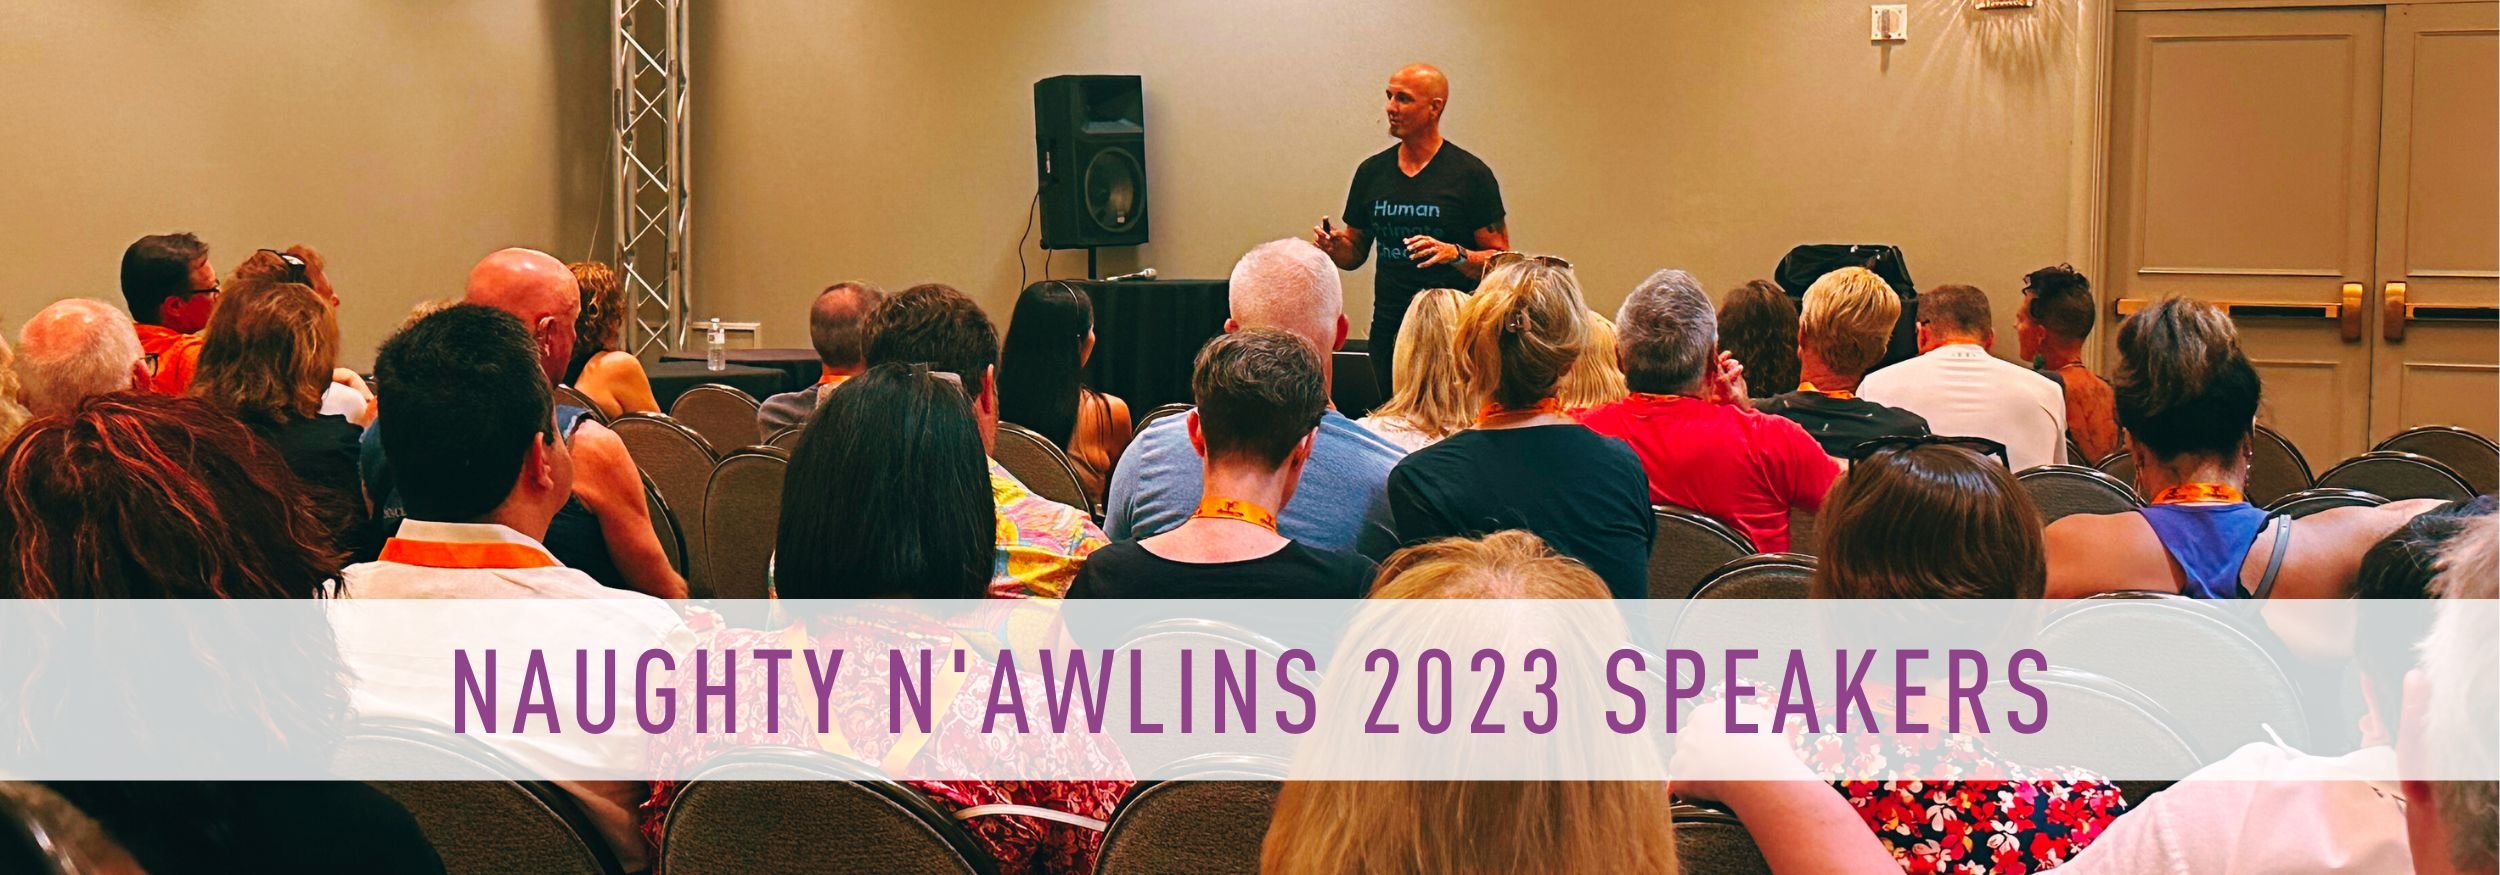 Naughty Nawlins 2023 Speakers — NAUGHTY EVENTS picture